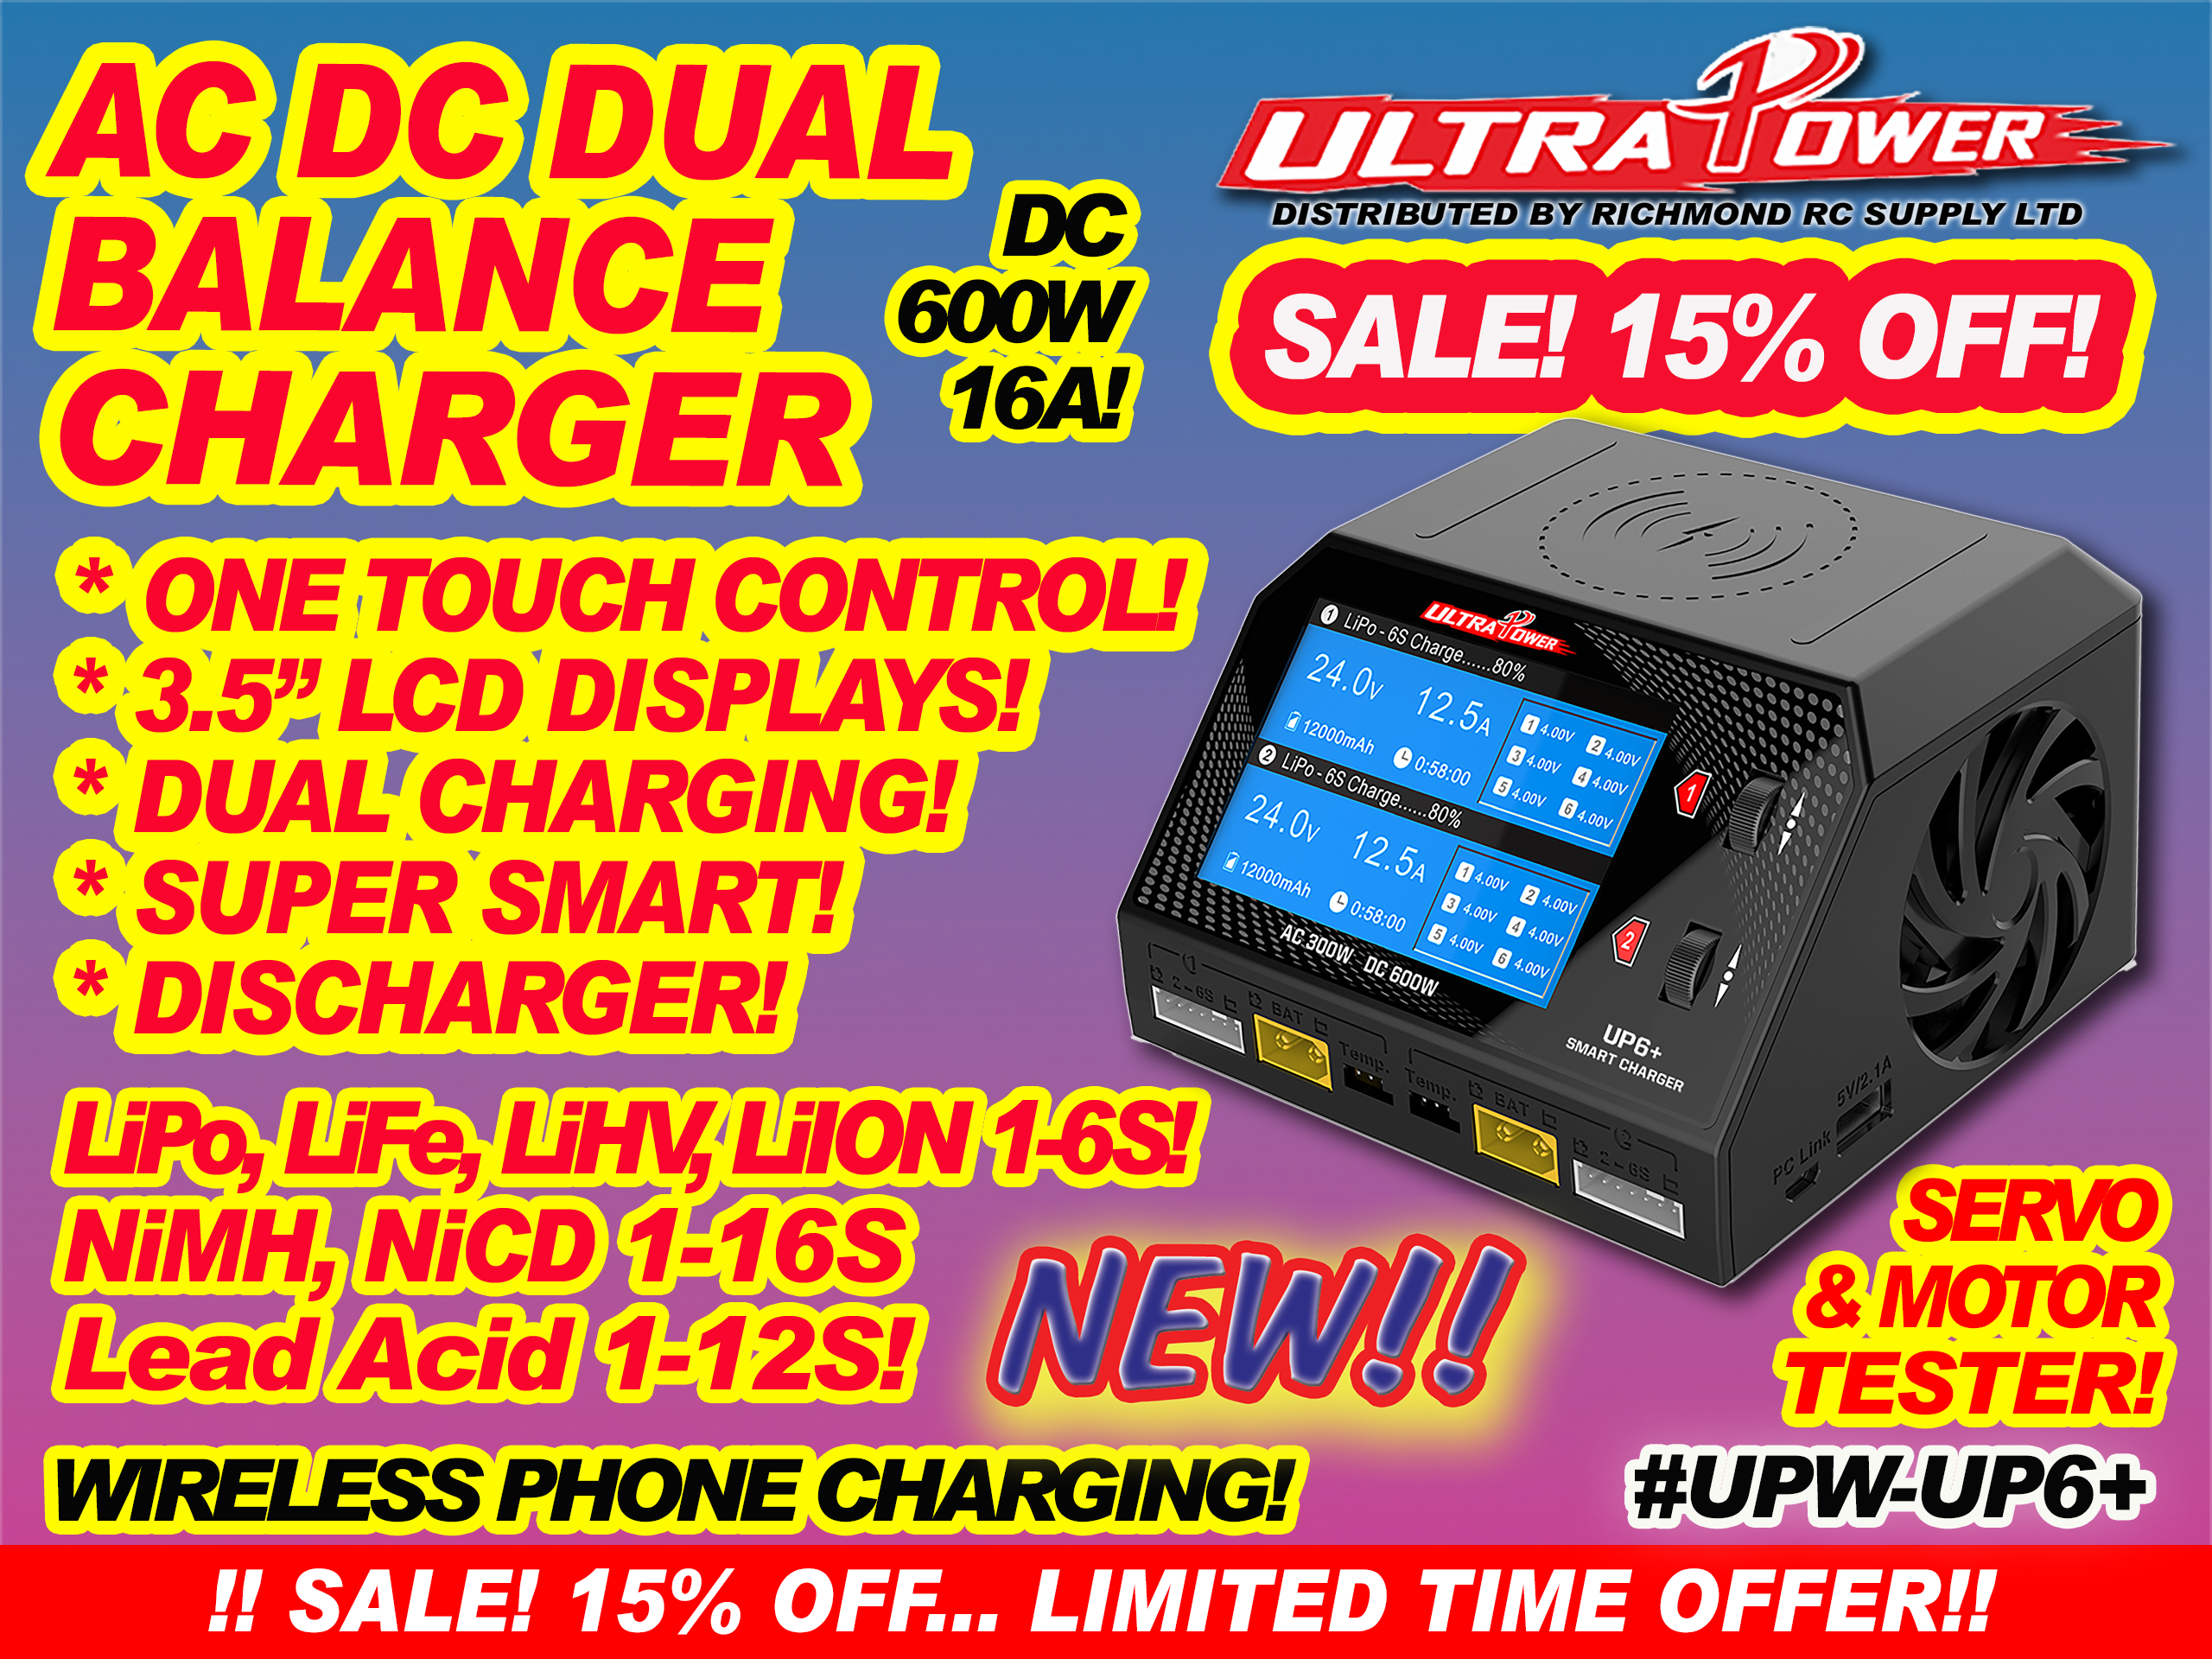 ULTRA POWER CHARGER - AC-DC, 600W 16A DUAL w/LCDx2  [ 51913]